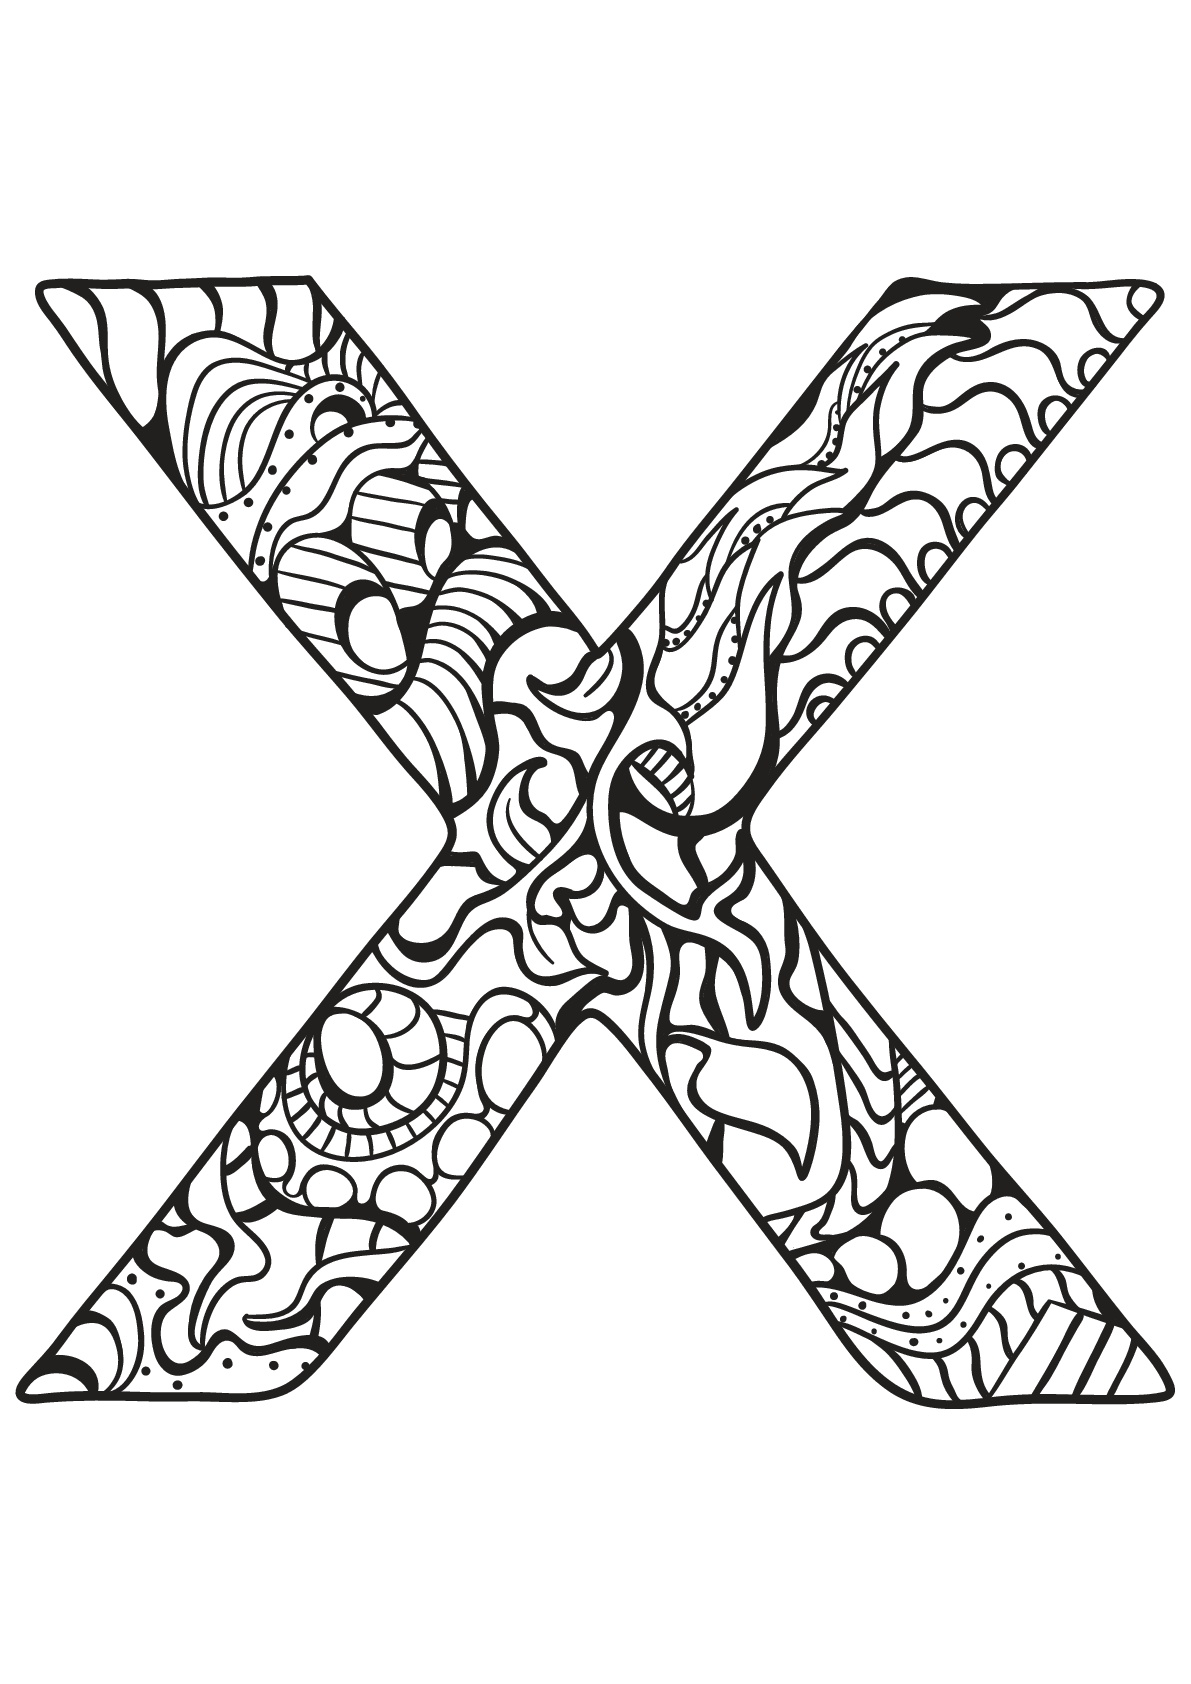 Free Alphabet coloring page to download : X